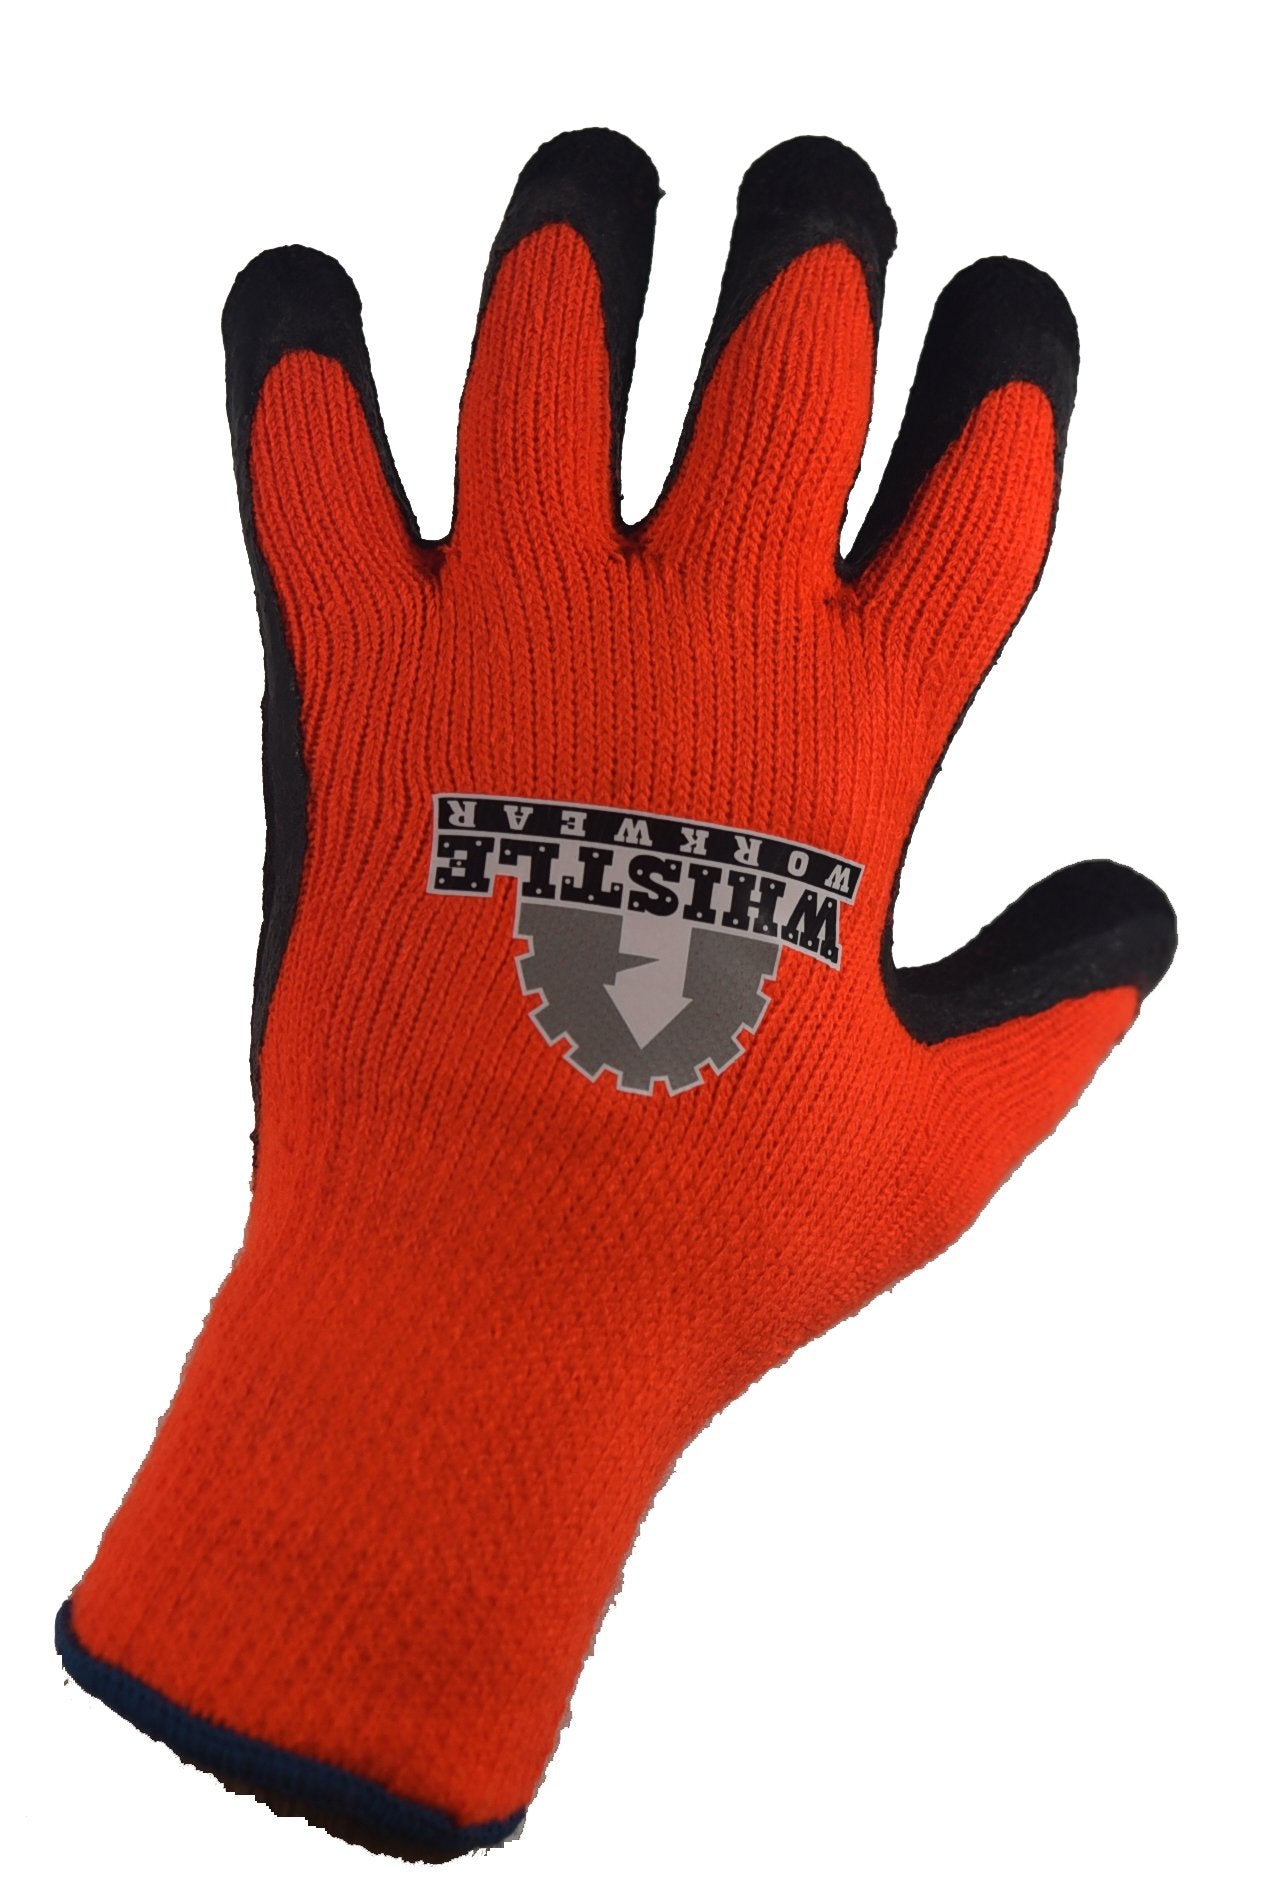 Majestic Whistle Workwear Winter Lined Hi-Vis Napped Terry Glove - Work World - Workwear, Work Boots, Safety Gear